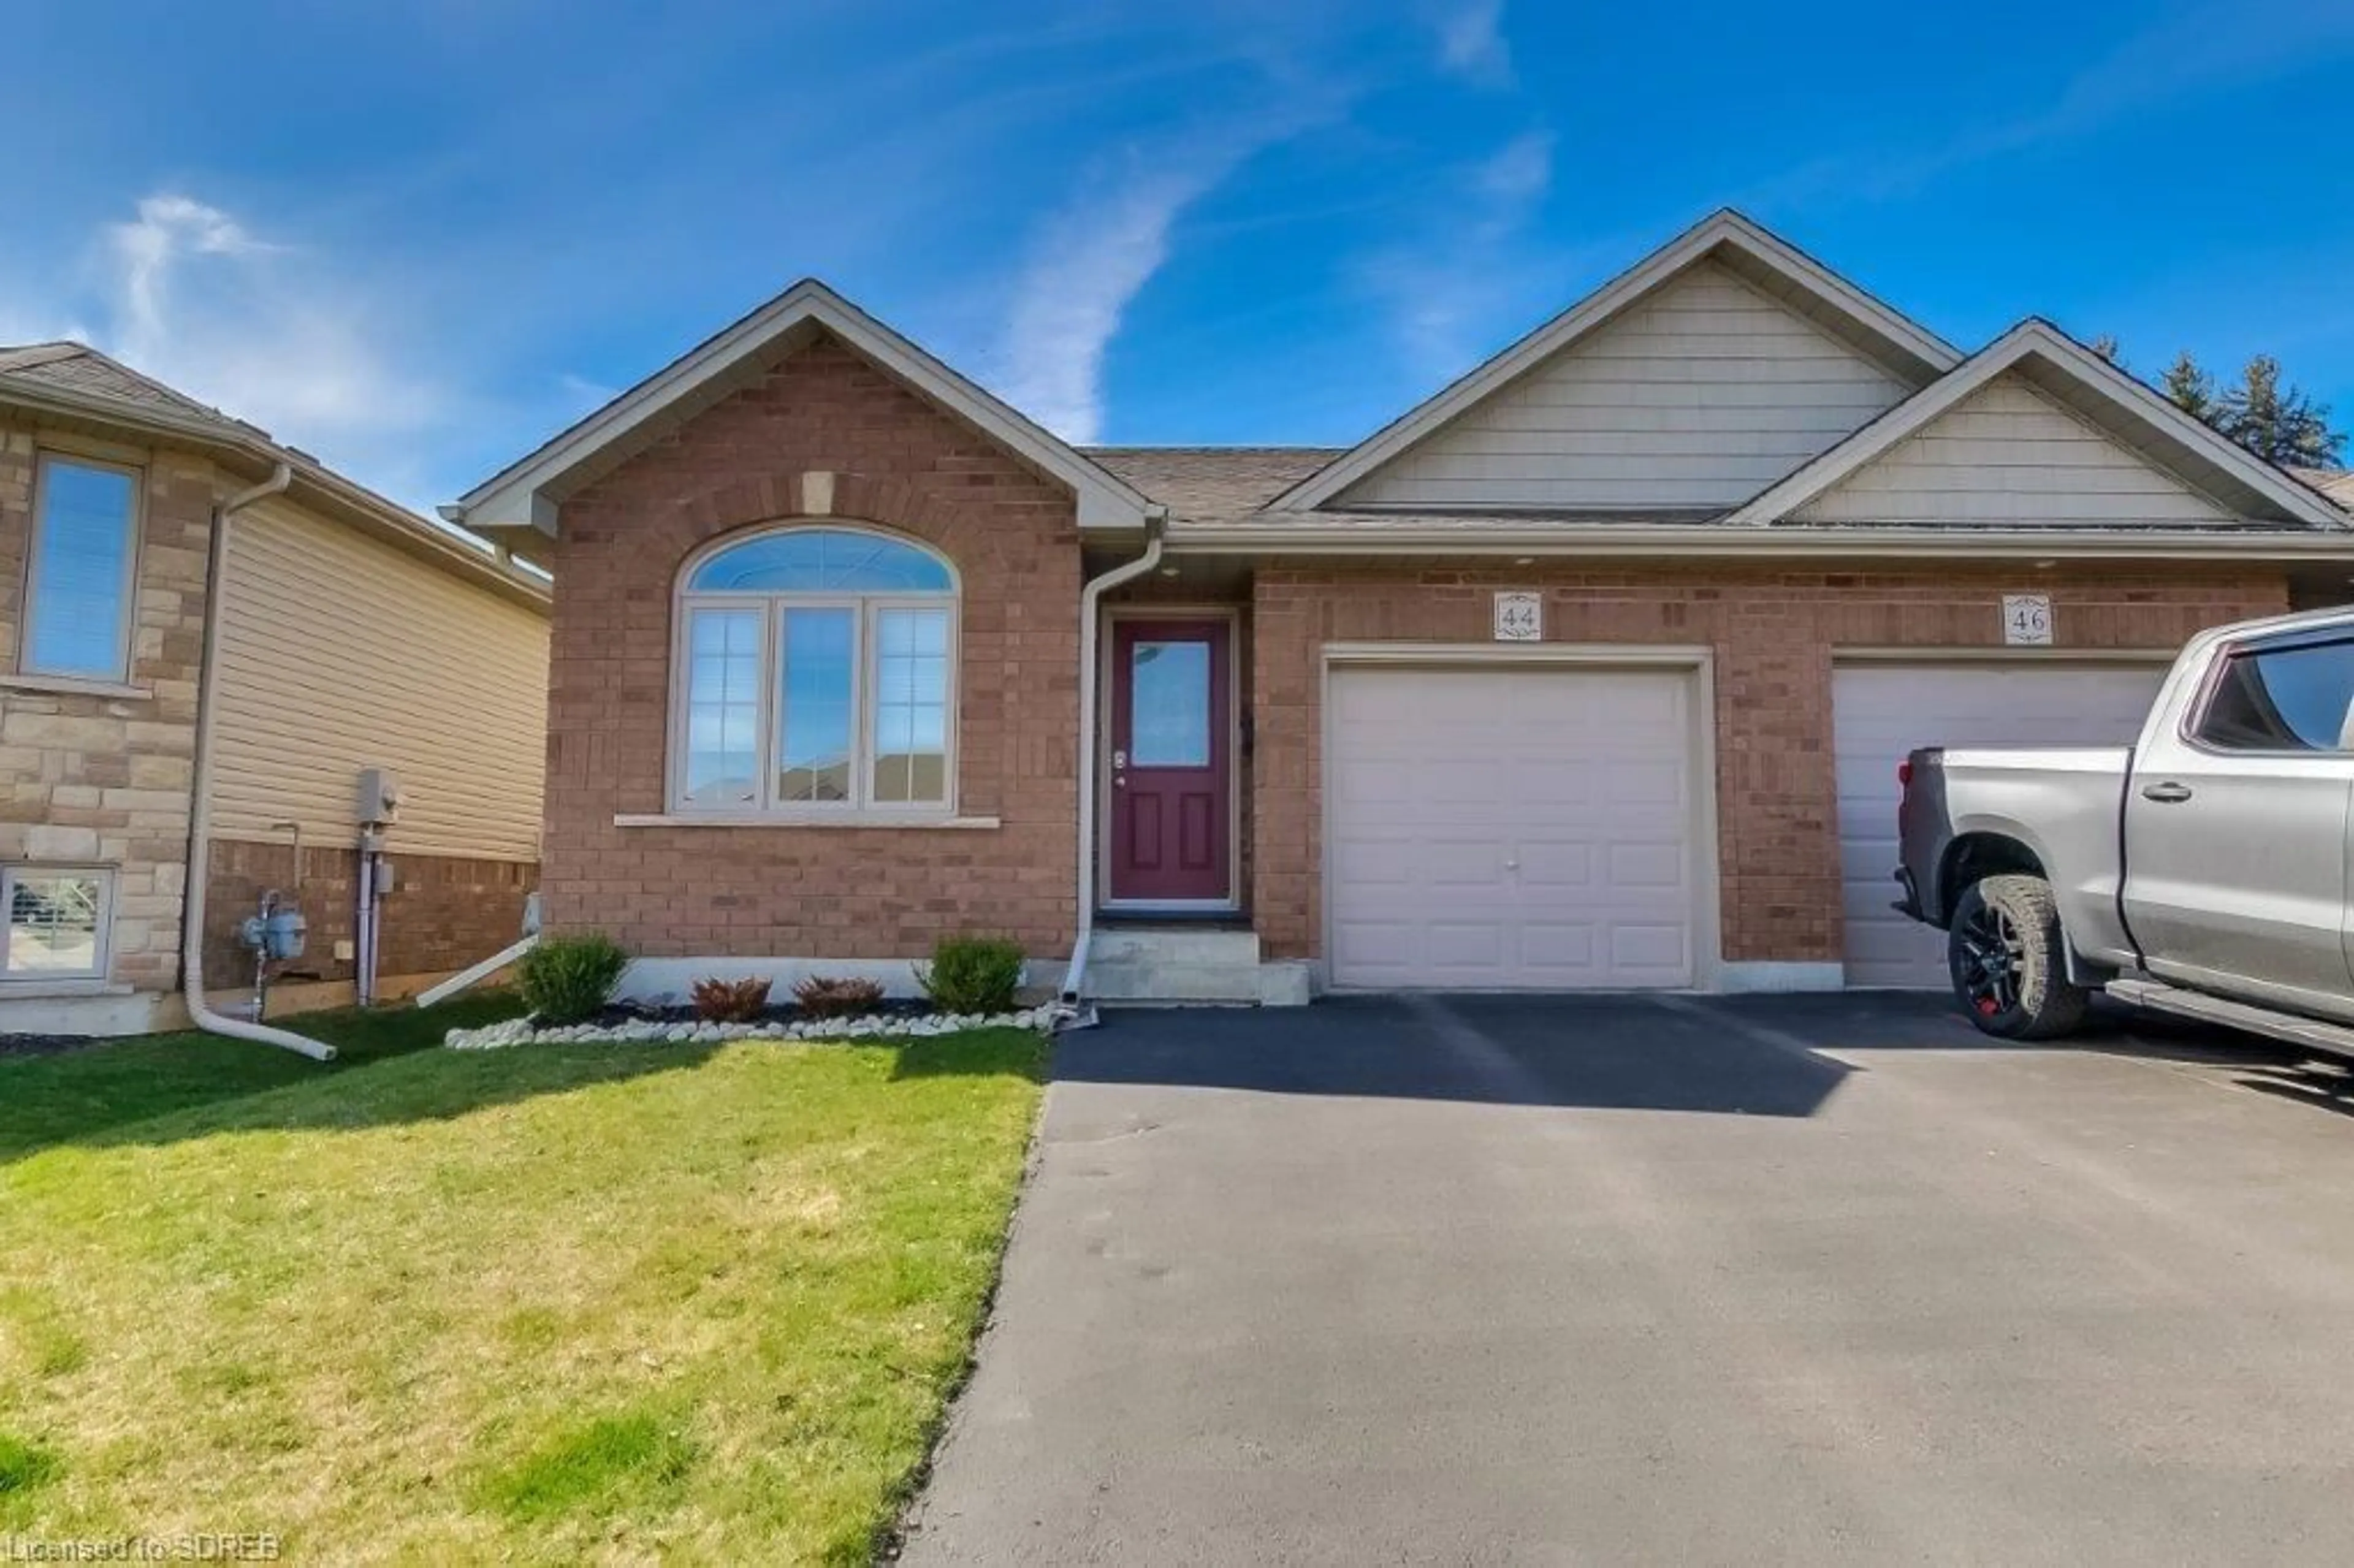 Frontside or backside of a home for 44 Millcroft Dr, Simcoe Ontario N3Y 0B1